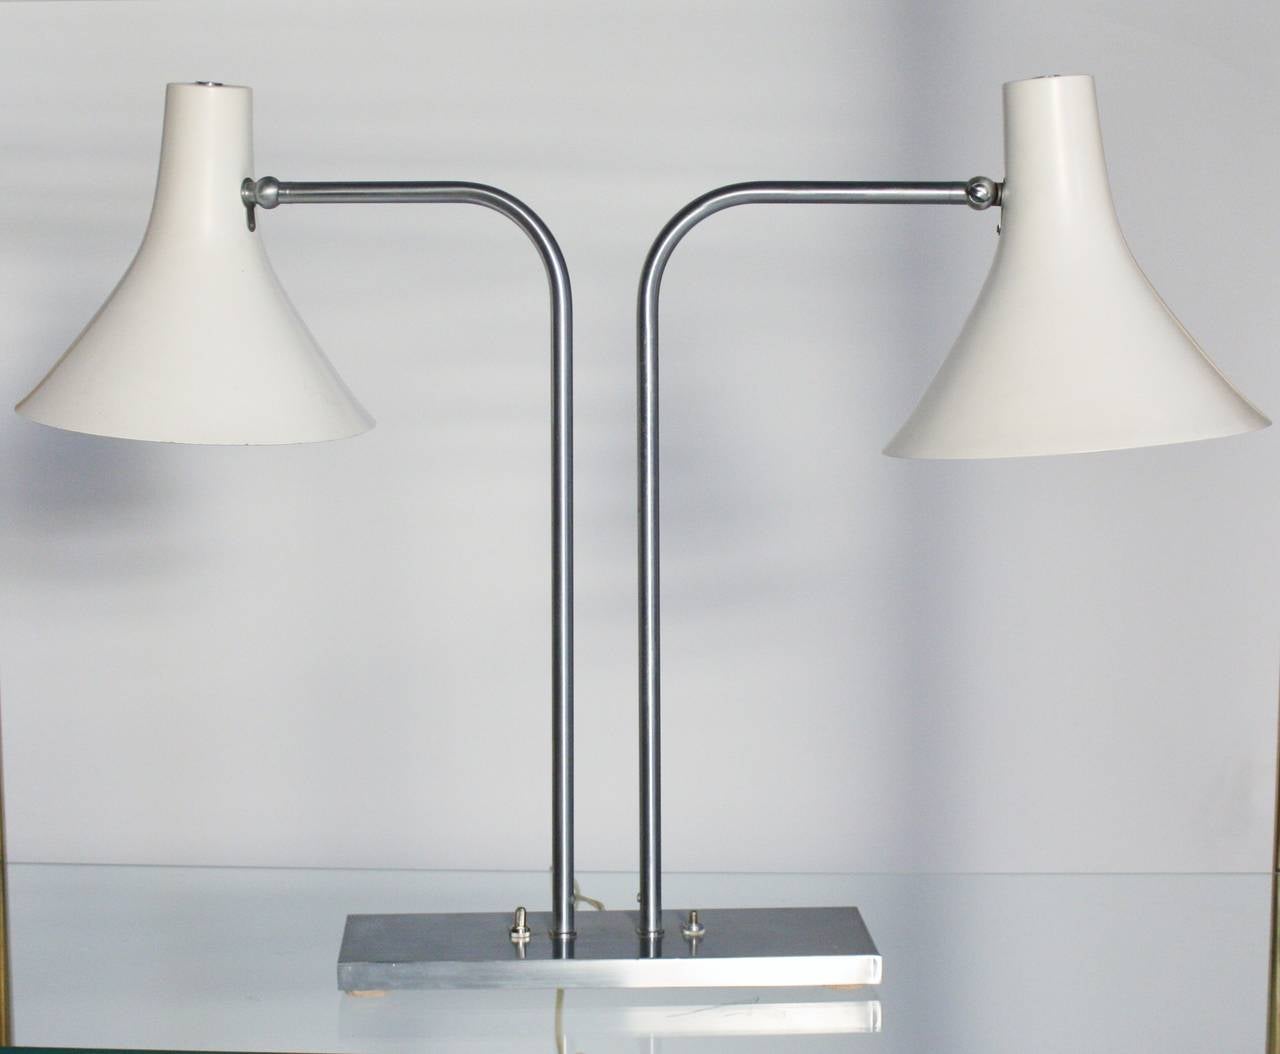 Iconic mid-century modern desk lamp by Greta Von Nessen in sought-after two-shade swivel style and brushed nickel arms. Each shade operates by a separate switch. Wired and in working condition.